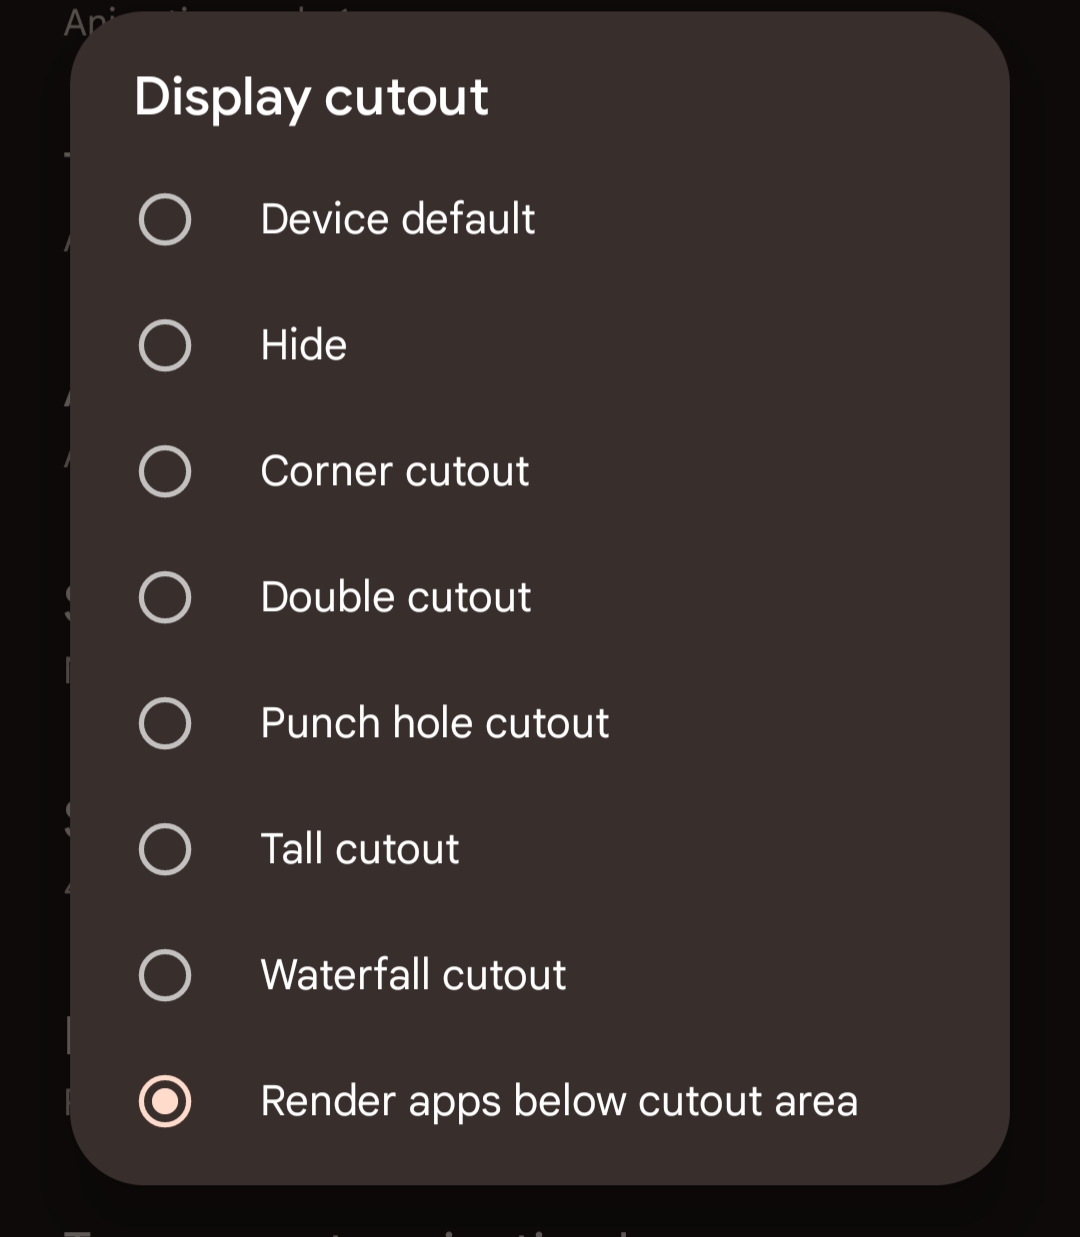 Android menu: "Display cutout", with the "Render apps below cutout area" option enabled